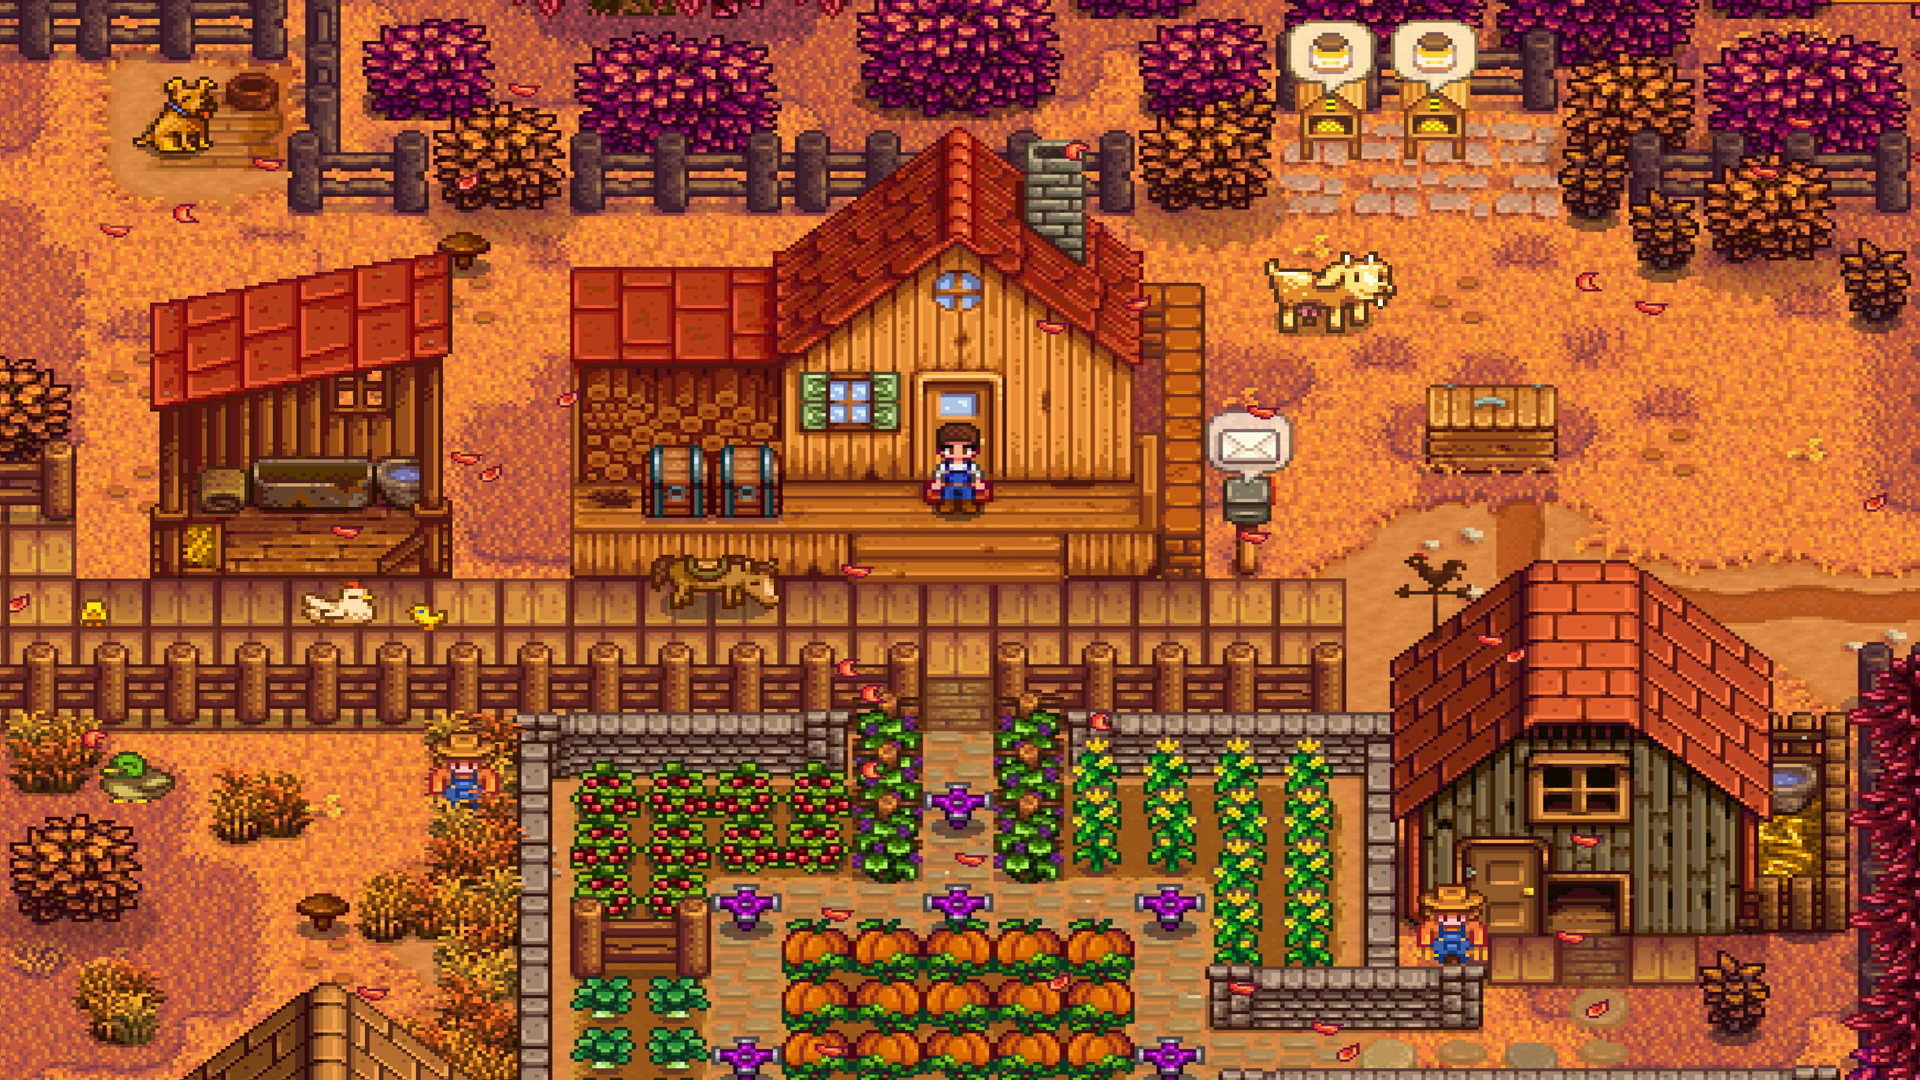 Can You Move Buildings In Stardew Valley Multiplayer Stardew Valley Guide Your Home For Everything There Is To Know About Life On The Farm Gamesradar